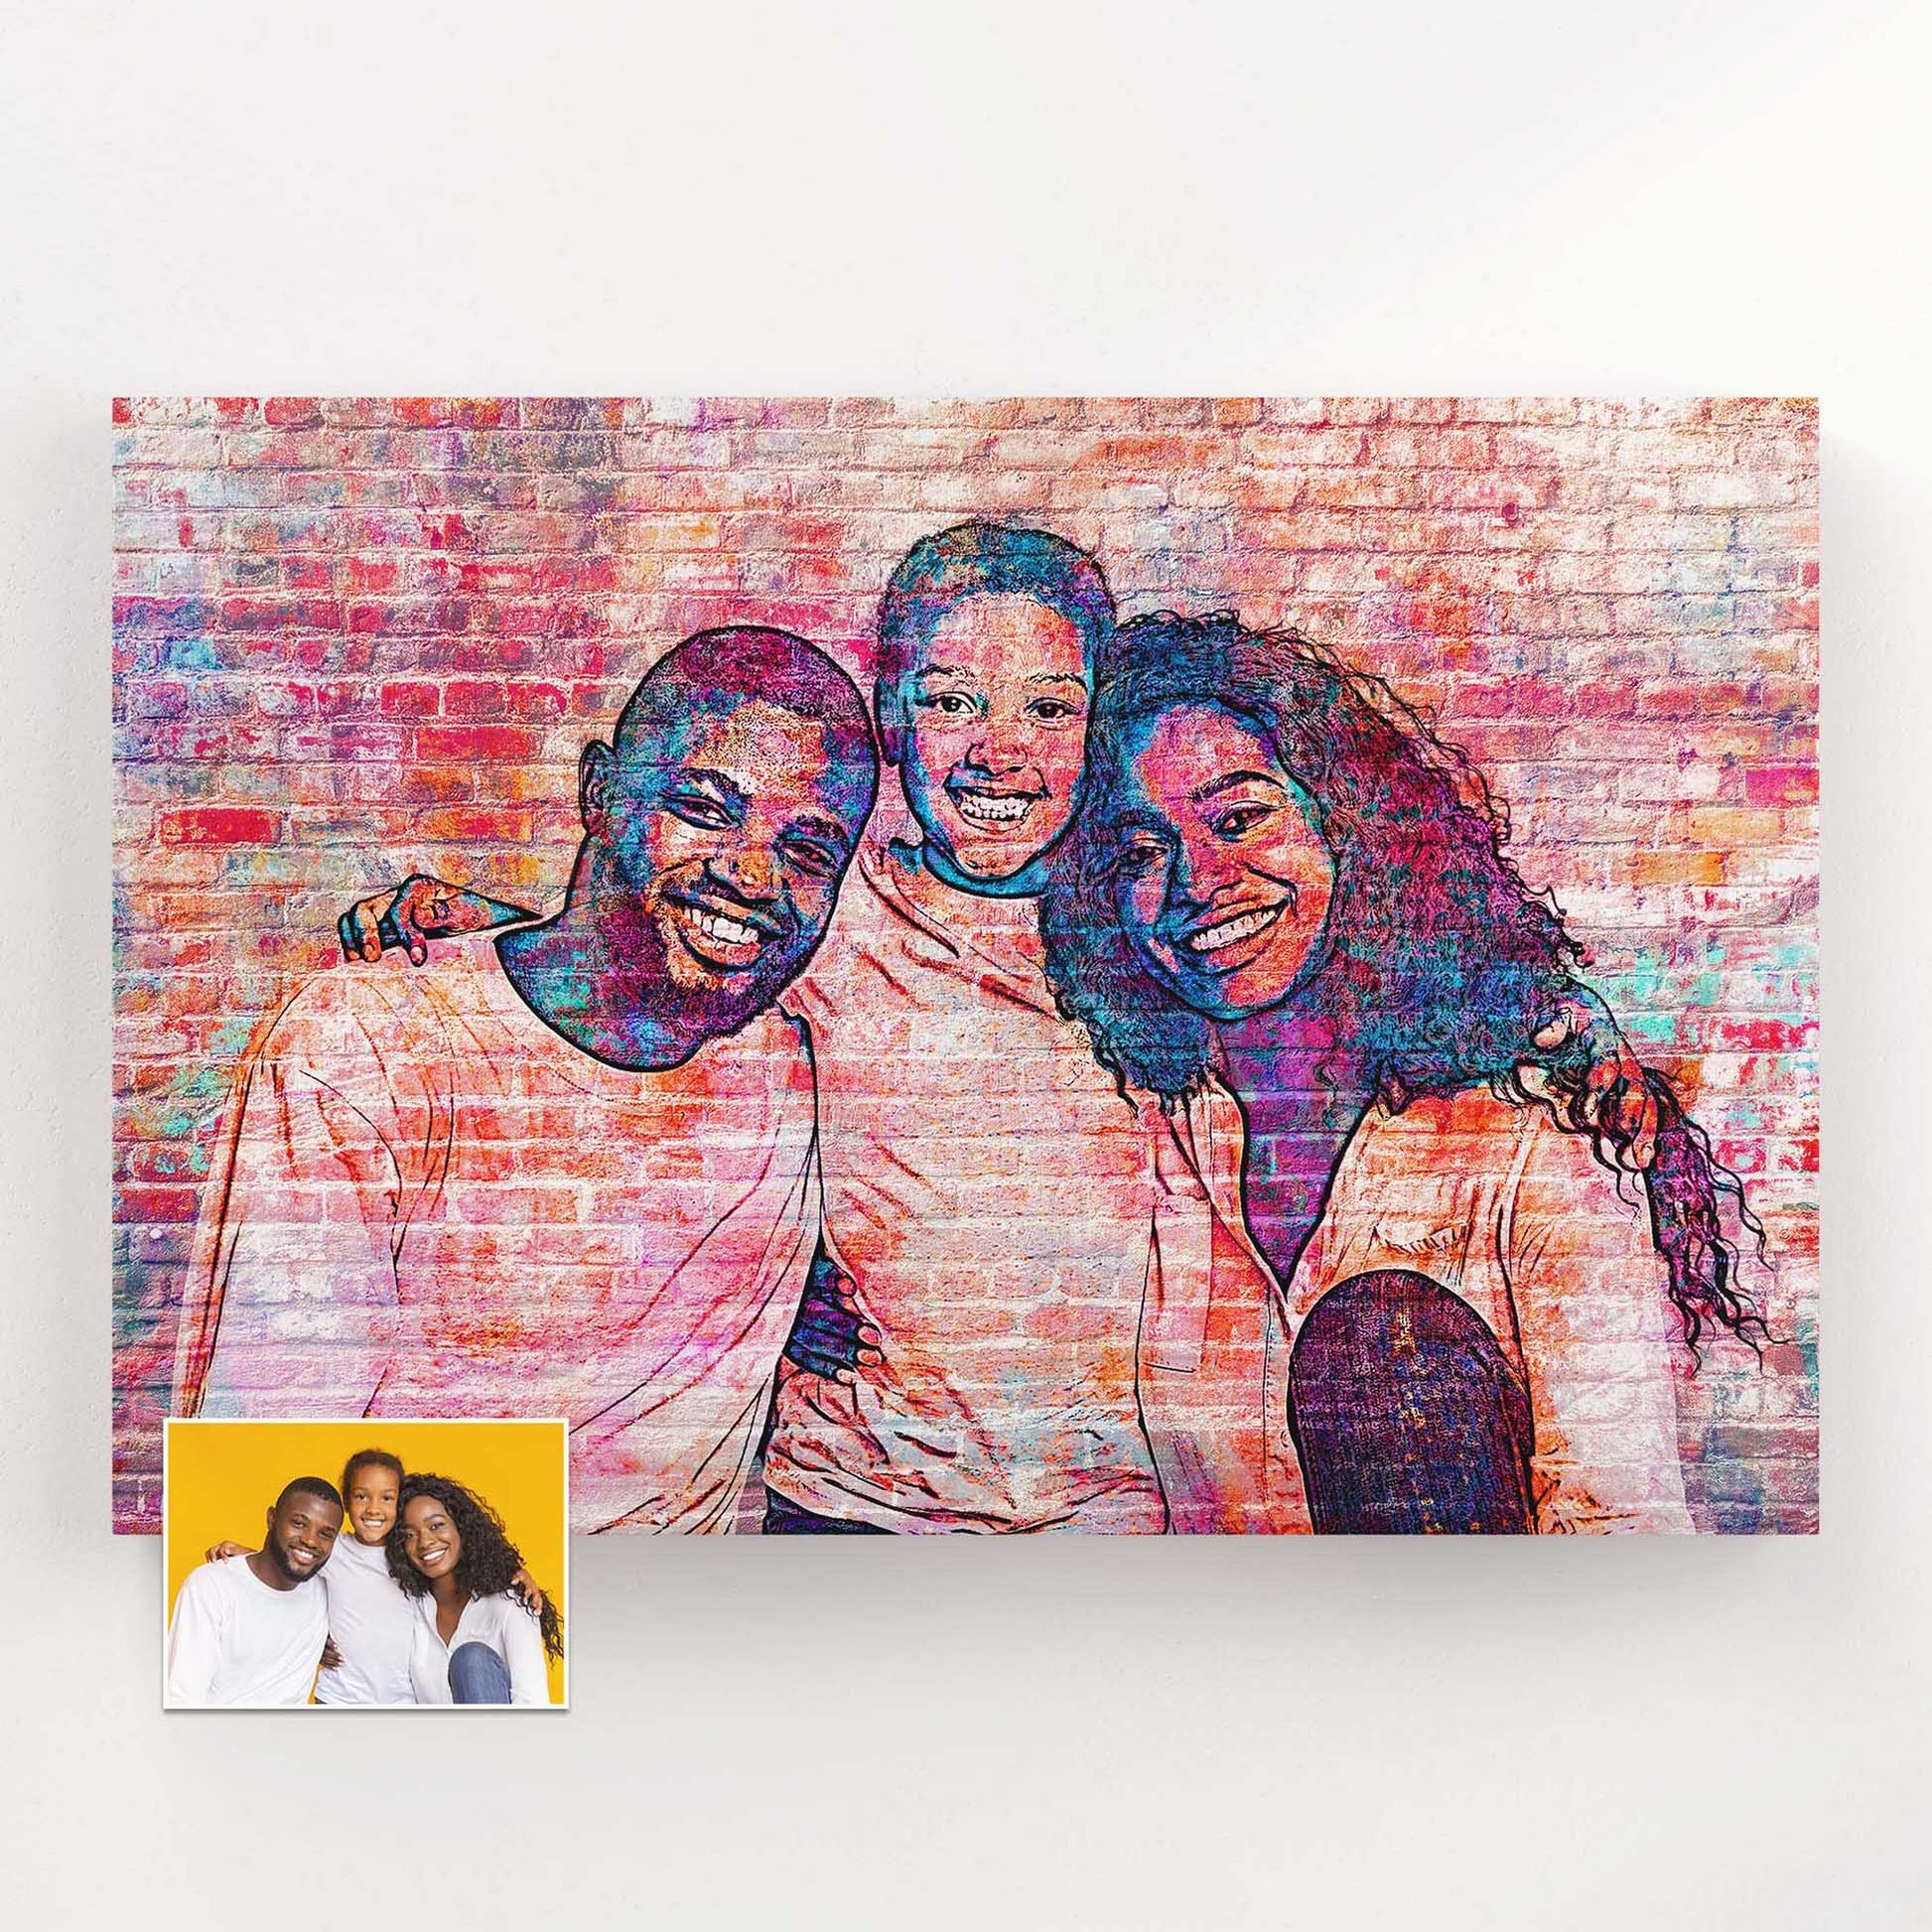 Unique Urban Art - Personalised Brick Graffiti Street Art Canvas - Make a statement with this original and inspired wall art. The graffiti design on a brick canvas adds a touch of urban style to any room